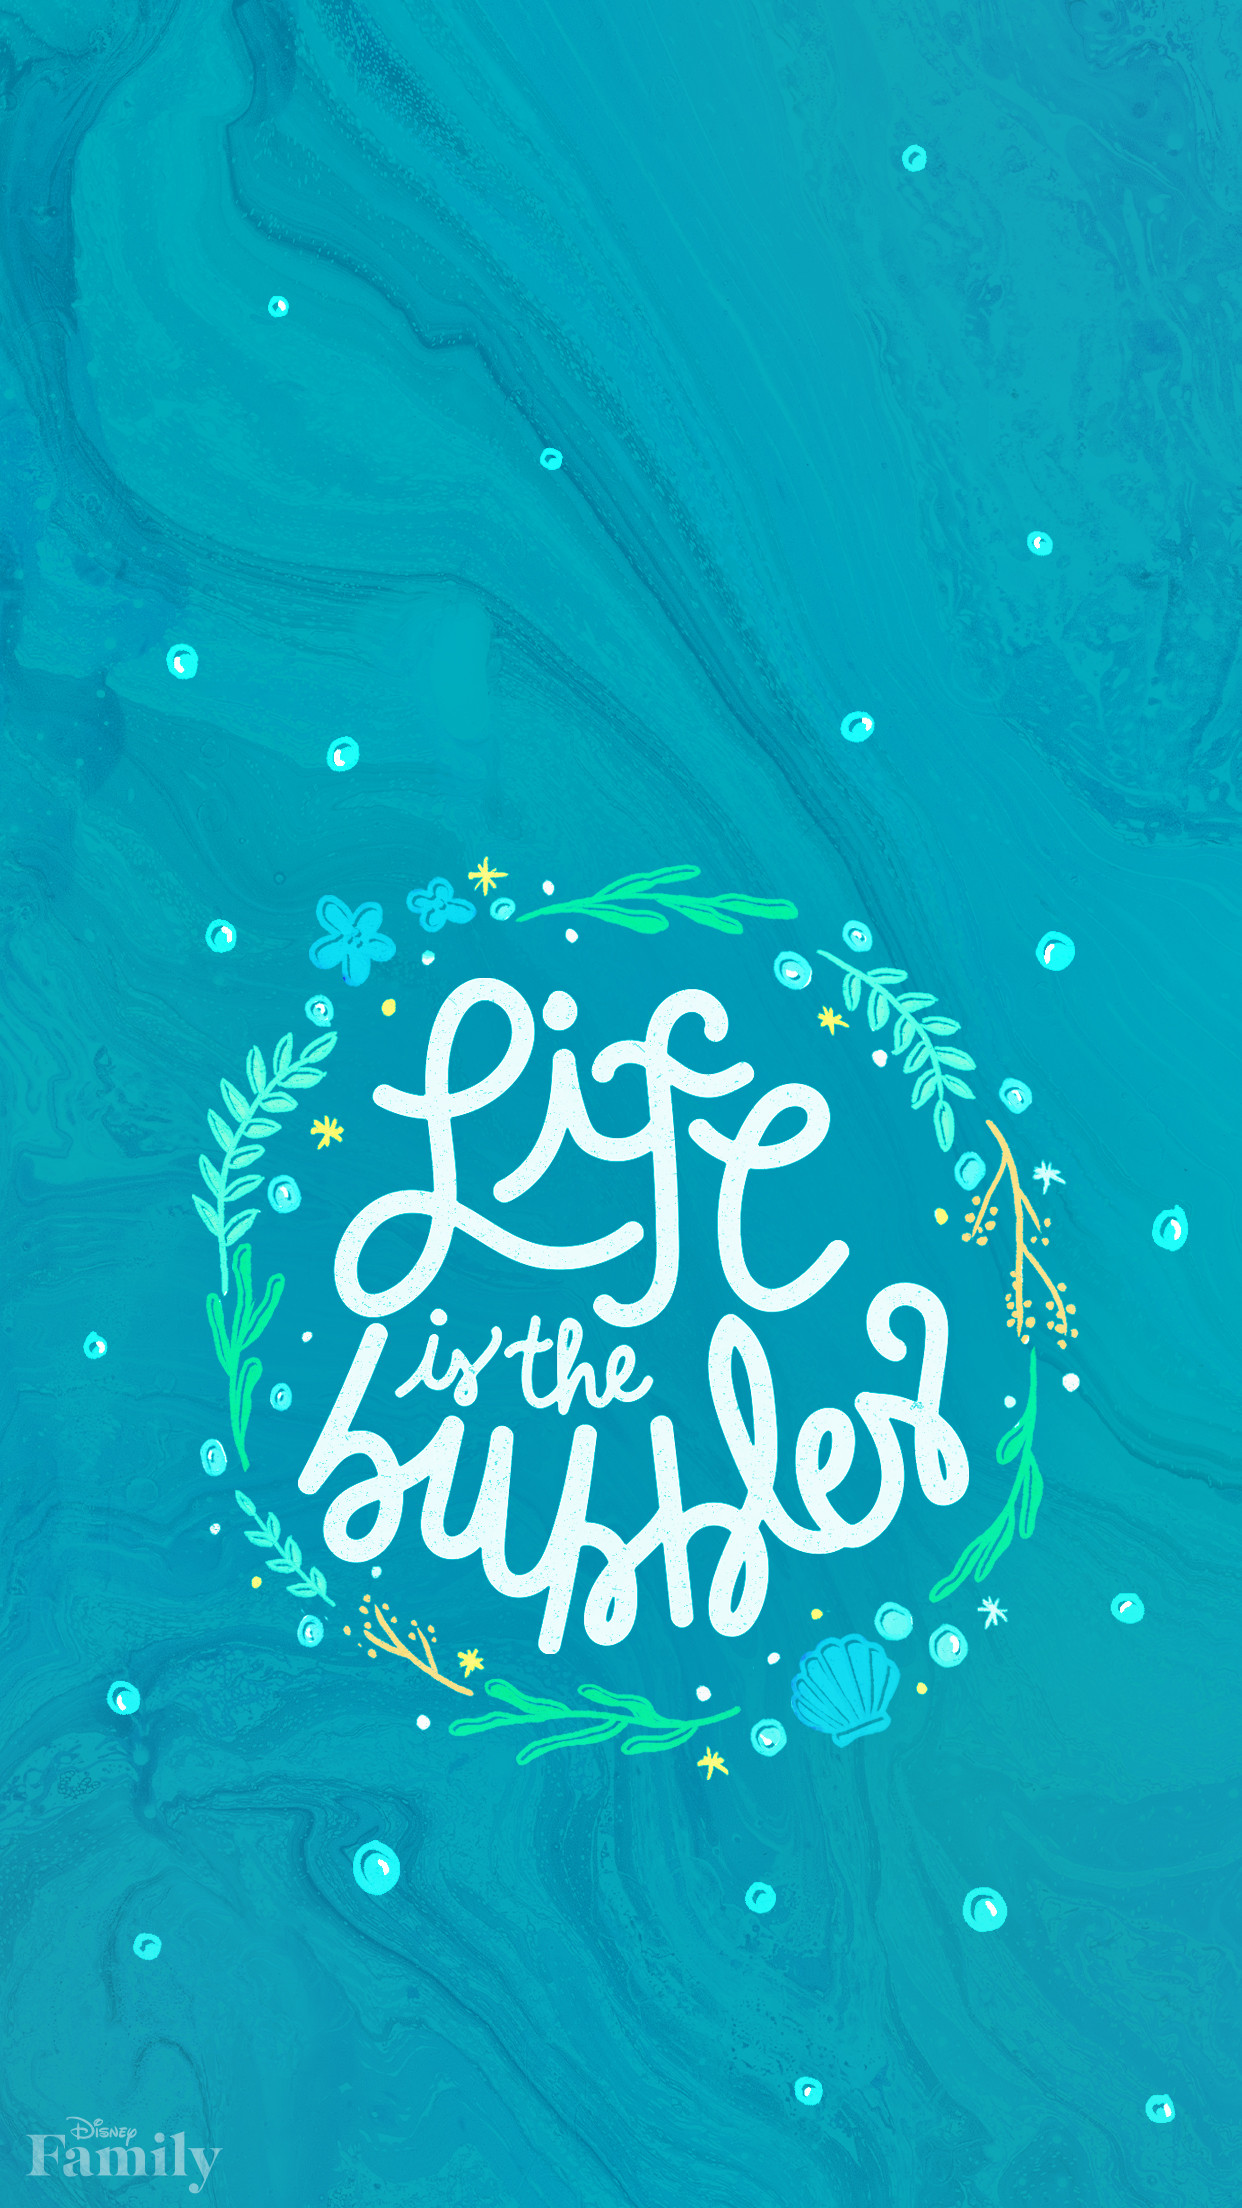 Find more inspirational phone backgrounds on Disney Style